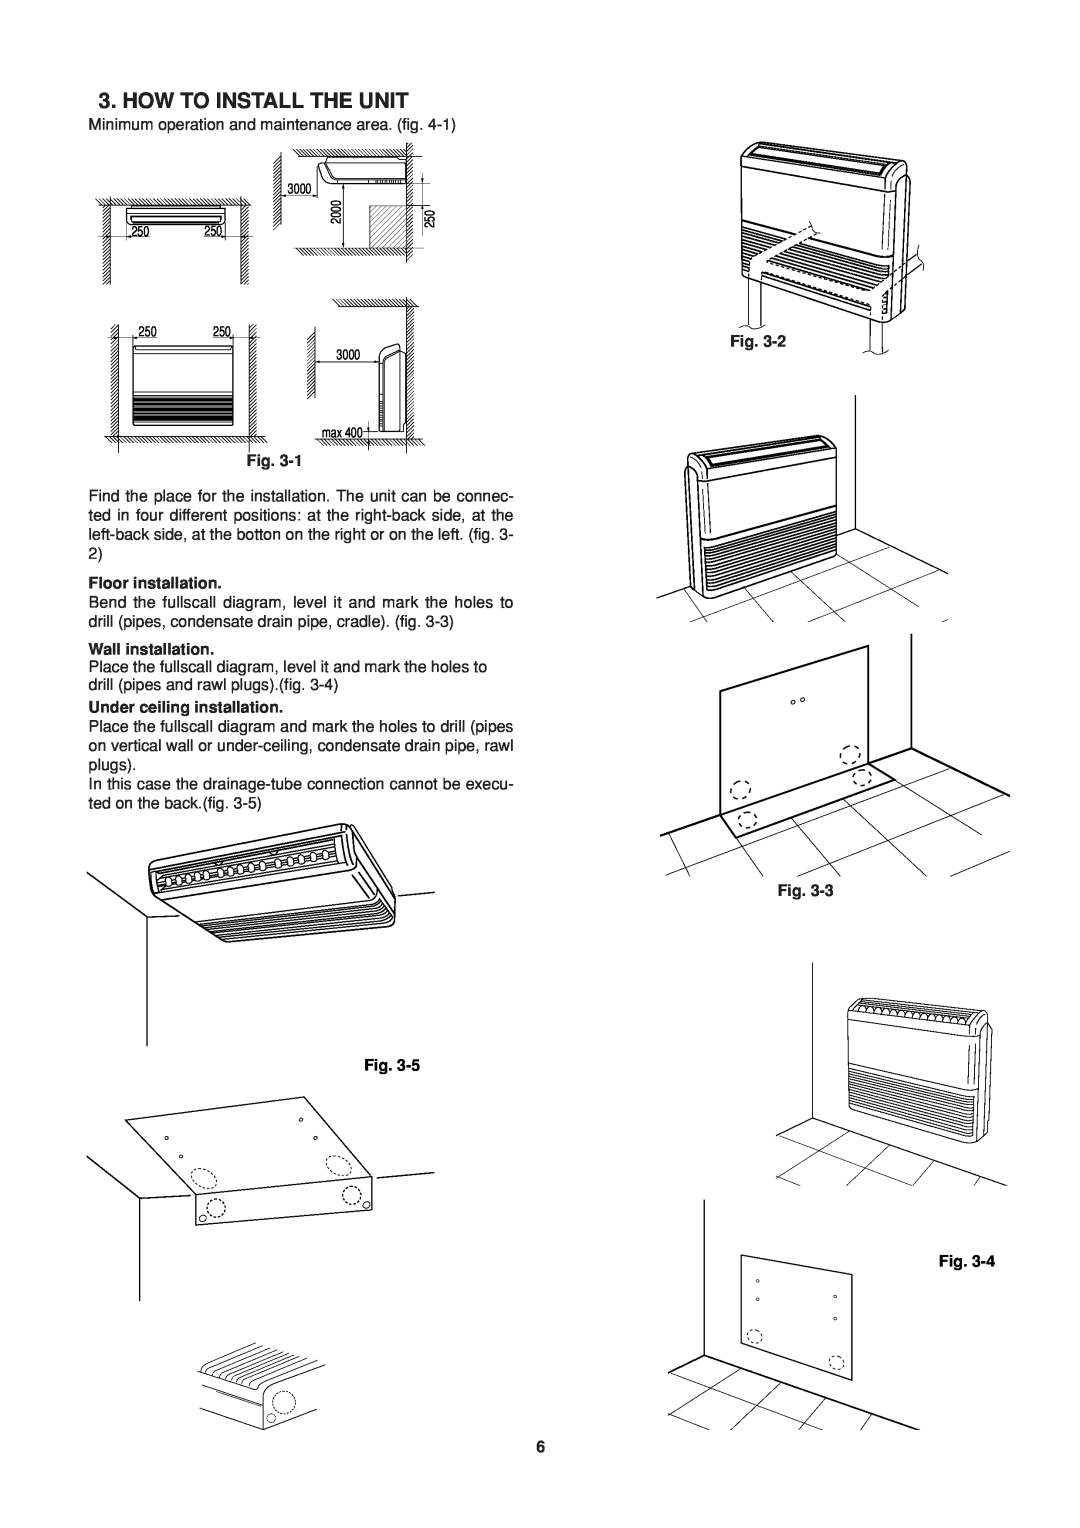 Sanyo SPW-FTR124EH56 How To Install The Unit, Floor installation, Wall installation, Under ceiling installation, Fig. Fig 